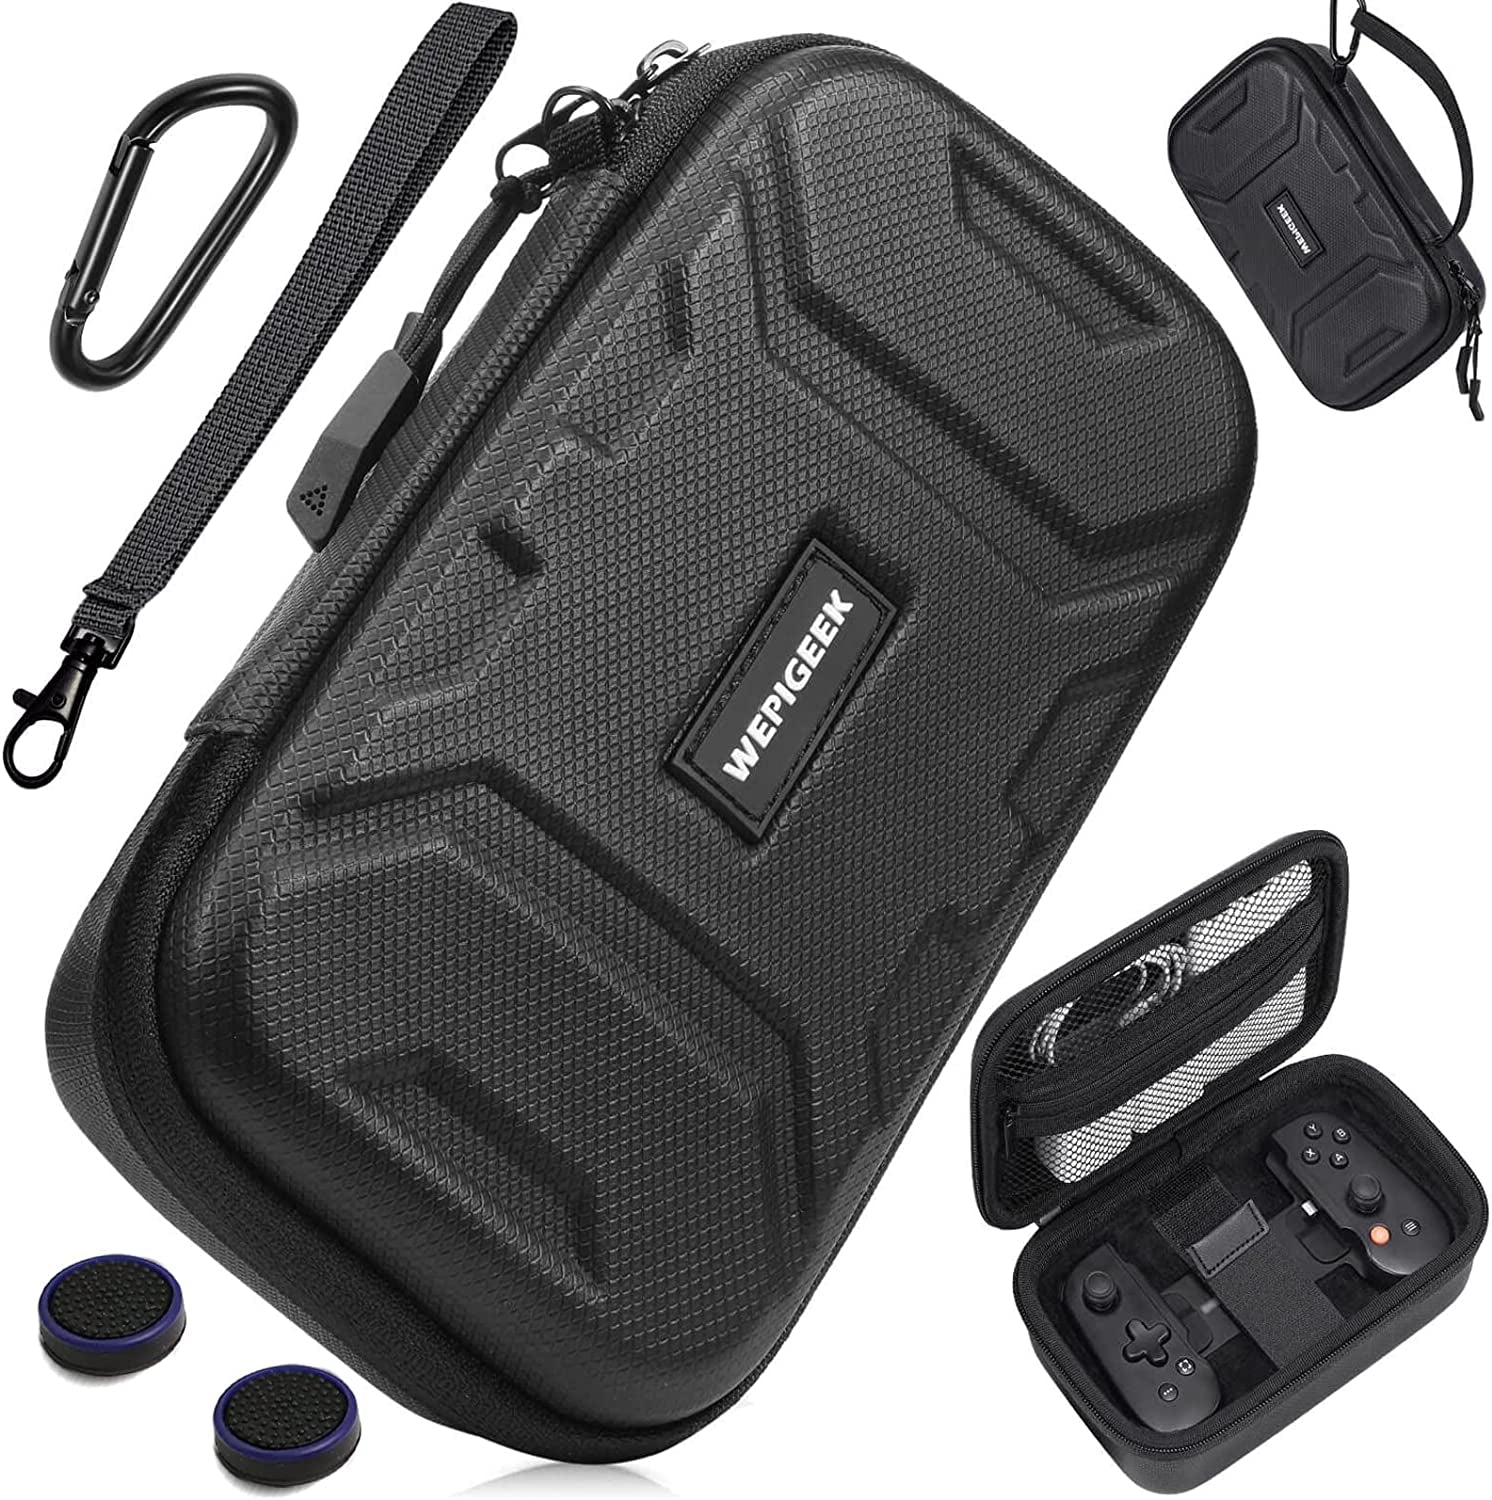 Case for Backbone One/Playstation Edition Mobile Controller,Portable Travel All Protective,Hard Messenger Carrying Bag, Strong Strap,Soft Lining,With Pockets for Accessories Black